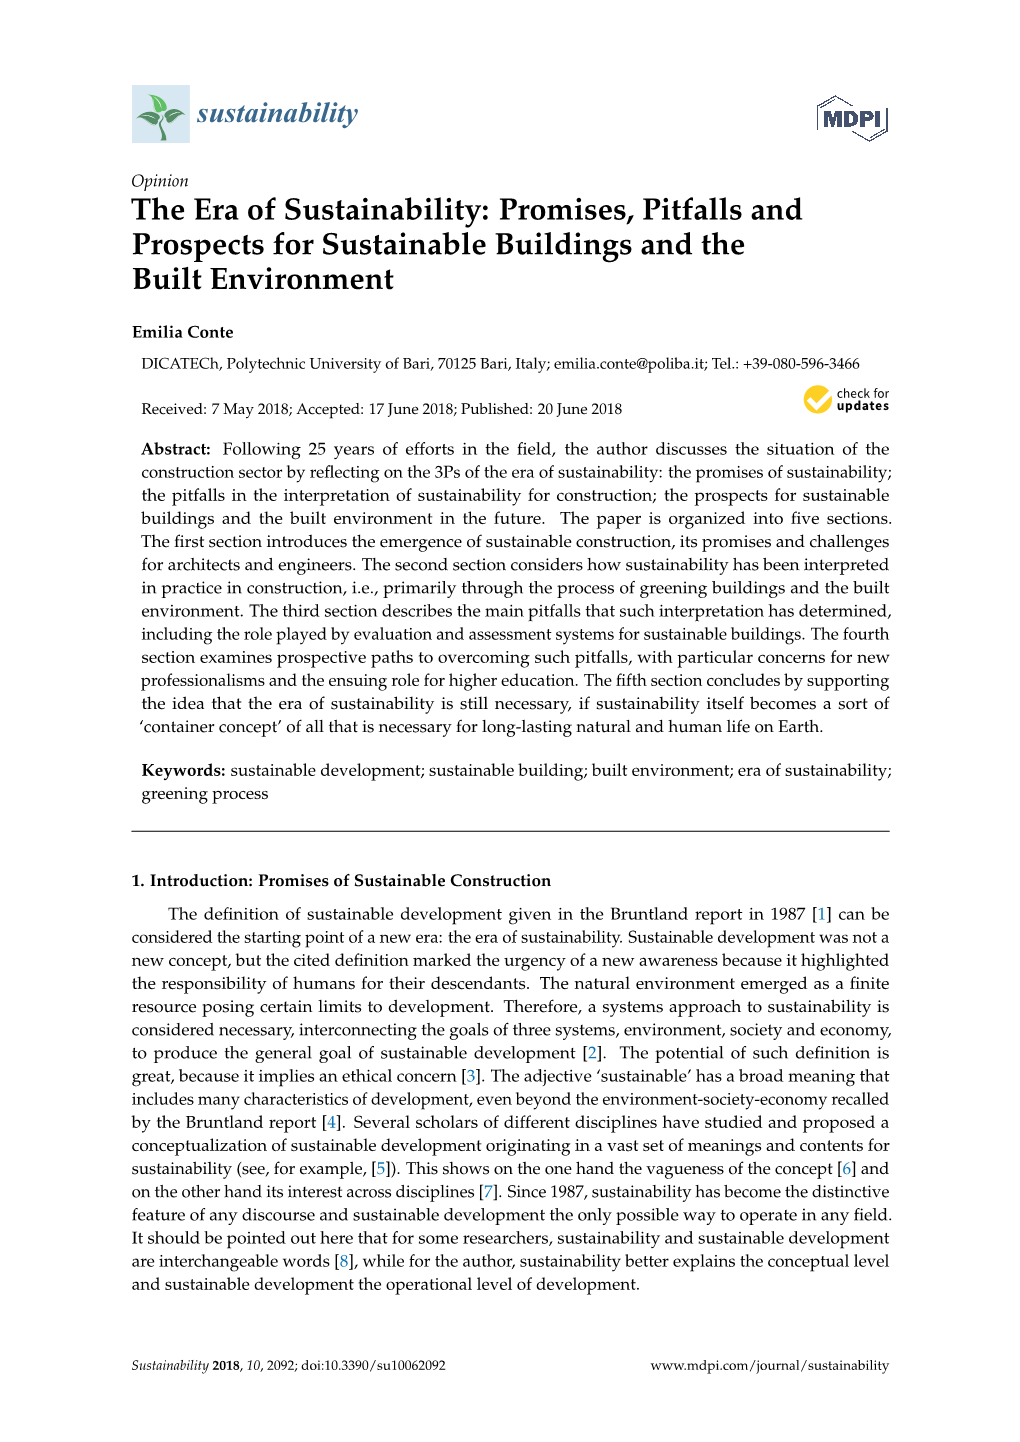 The Era of Sustainability: Promises, Pitfalls and Prospects for Sustainable Buildings and the Built Environment